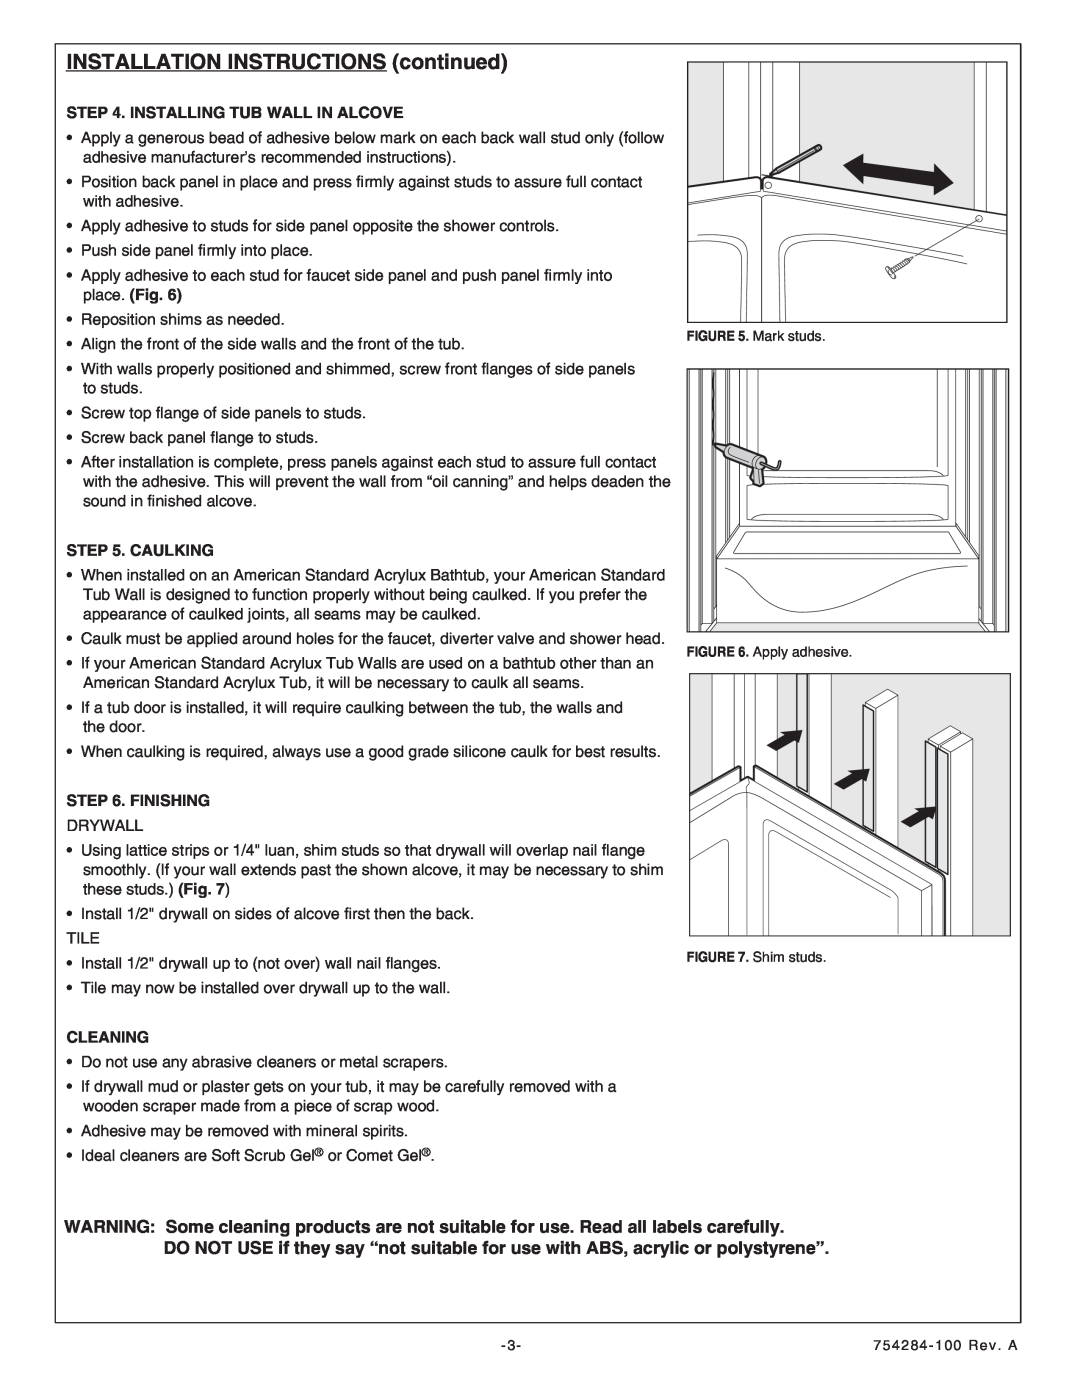 American Standard 6030Y1.BWT.XXX INSTALLATION INSTRUCTIONScontinued, Installing Tub Wall In Alcove, place. Fig, Caulking 